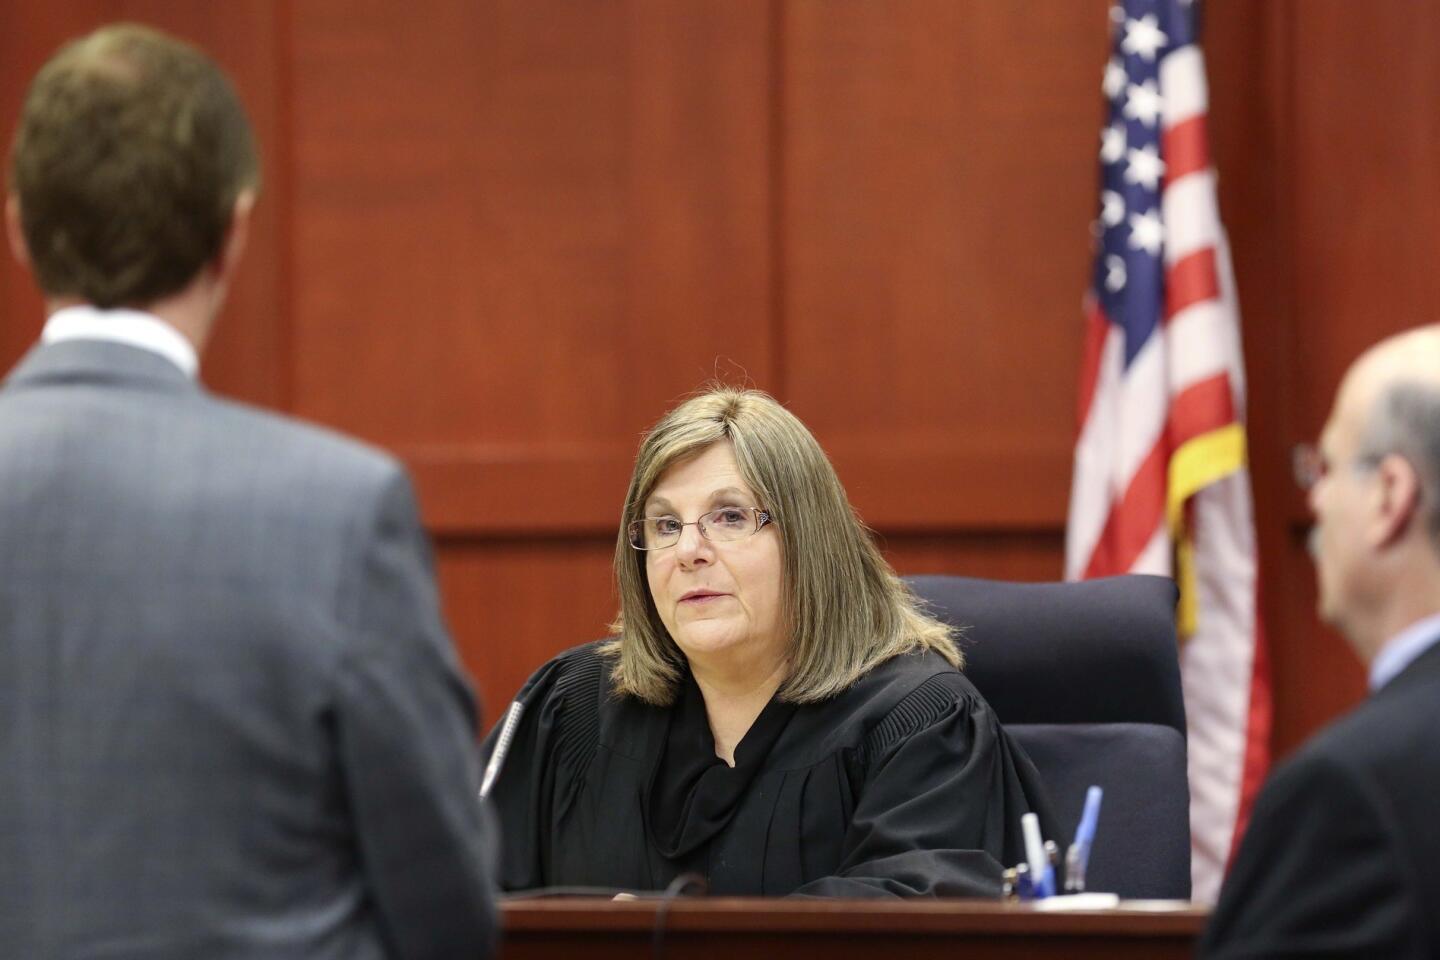 Florida Circuit Judge Debra S. Nelson rules that Zimmerman's defense team cannot delay the trial further. Zimmerman is set to stand trial in June for second-degree murder.More: Judge declines stay; case to proceed in June